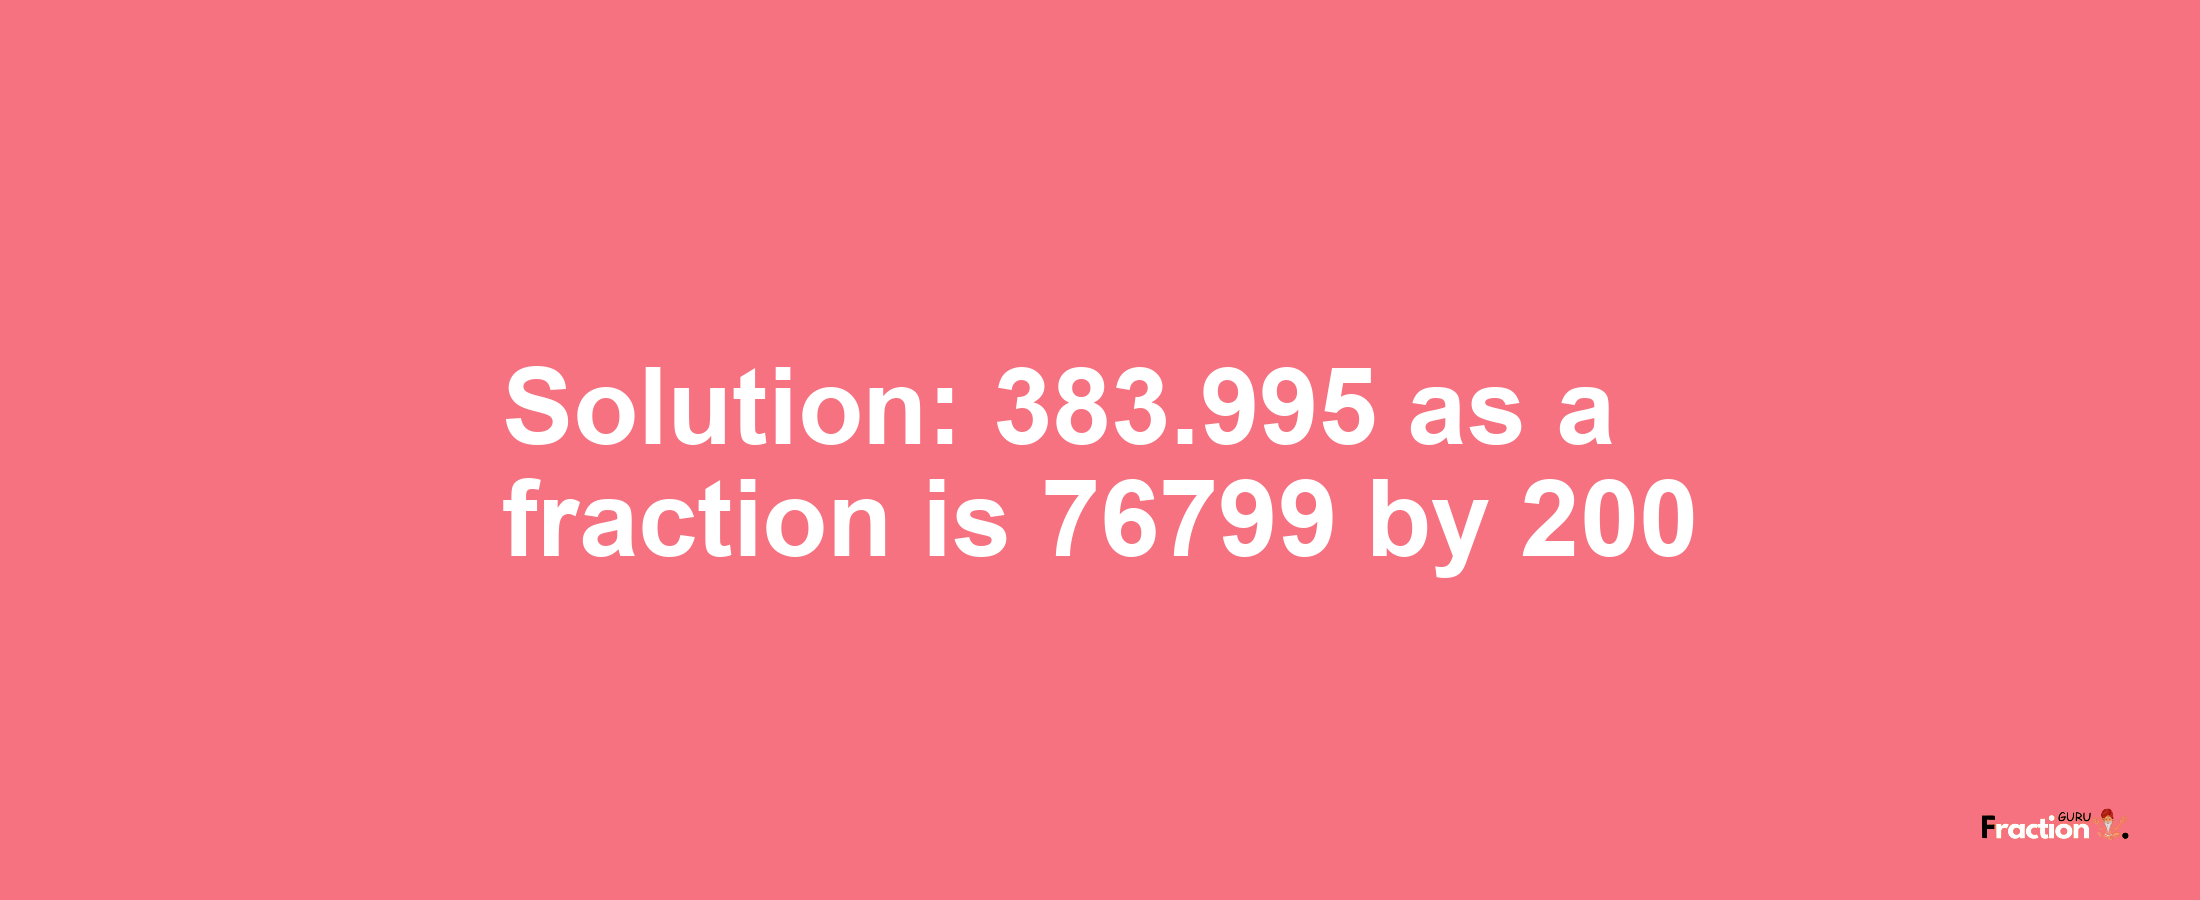 Solution:383.995 as a fraction is 76799/200